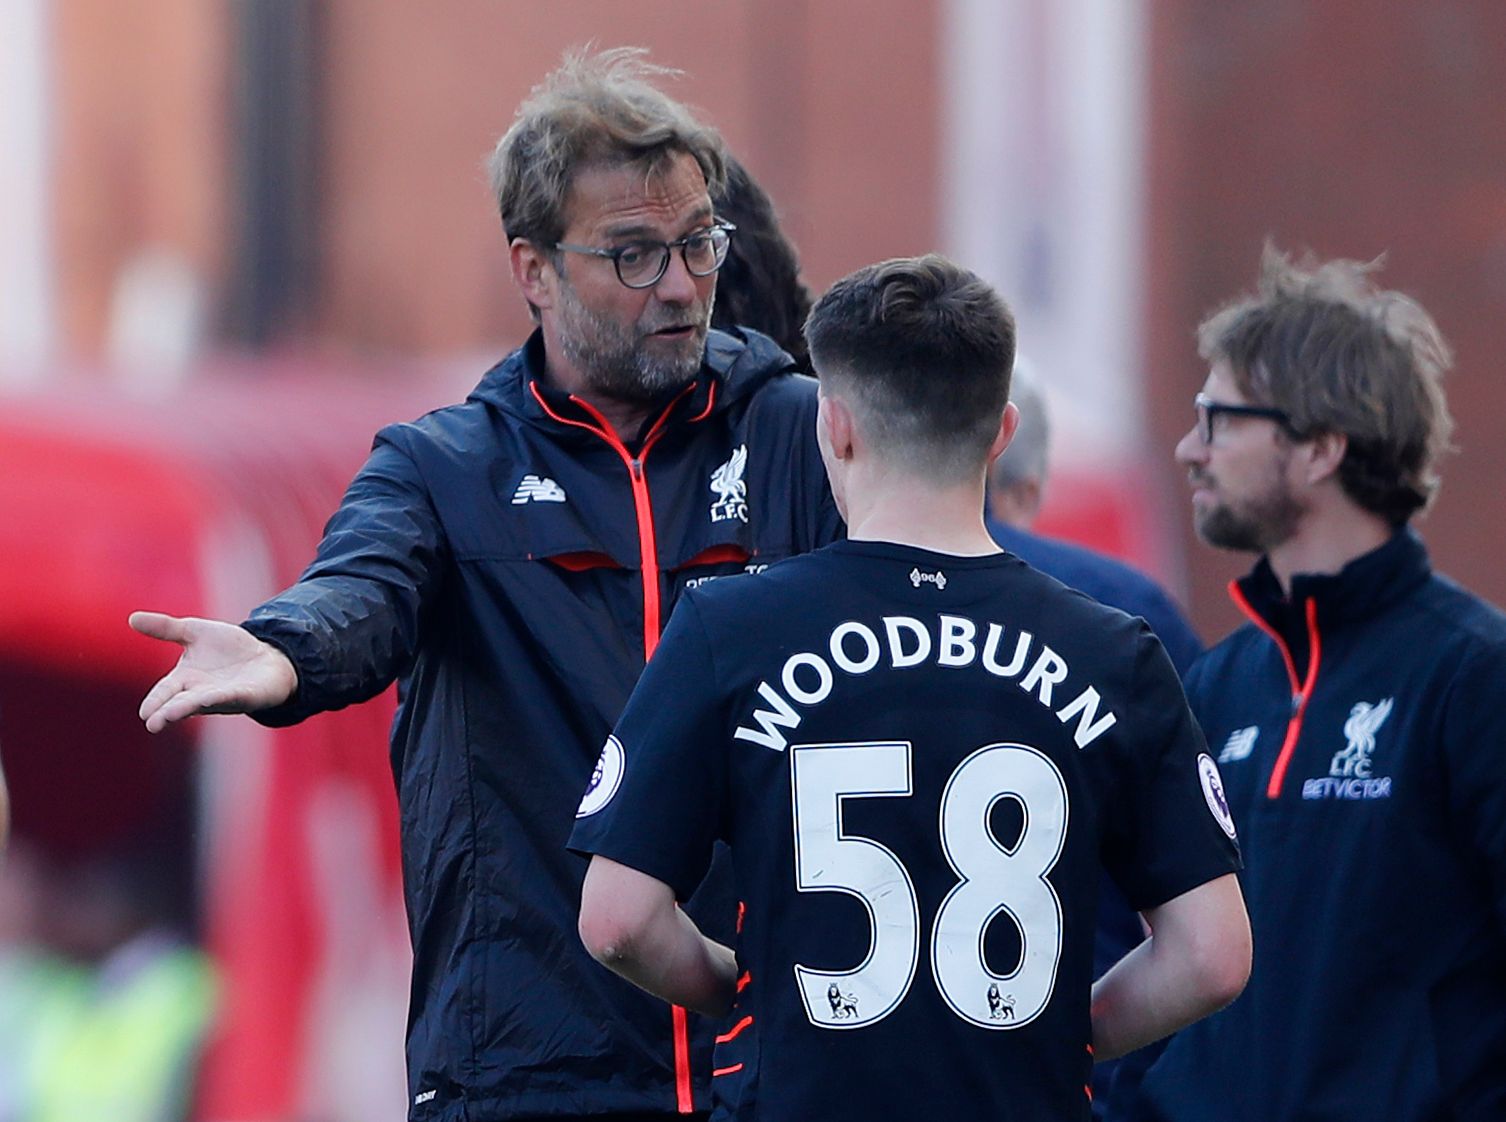 Britain Football Soccer - Stoke City v Liverpool - Premier League - bet365 Stadium - 8/4/17 Liverpool manager Juergen Klopp speaks with Ben Woodburn  Action Images via Reuters / Carl Recine Livepic EDITORIAL USE ONLY. No use with unauthorized audio, video, data, fixture lists, club/league logos or 